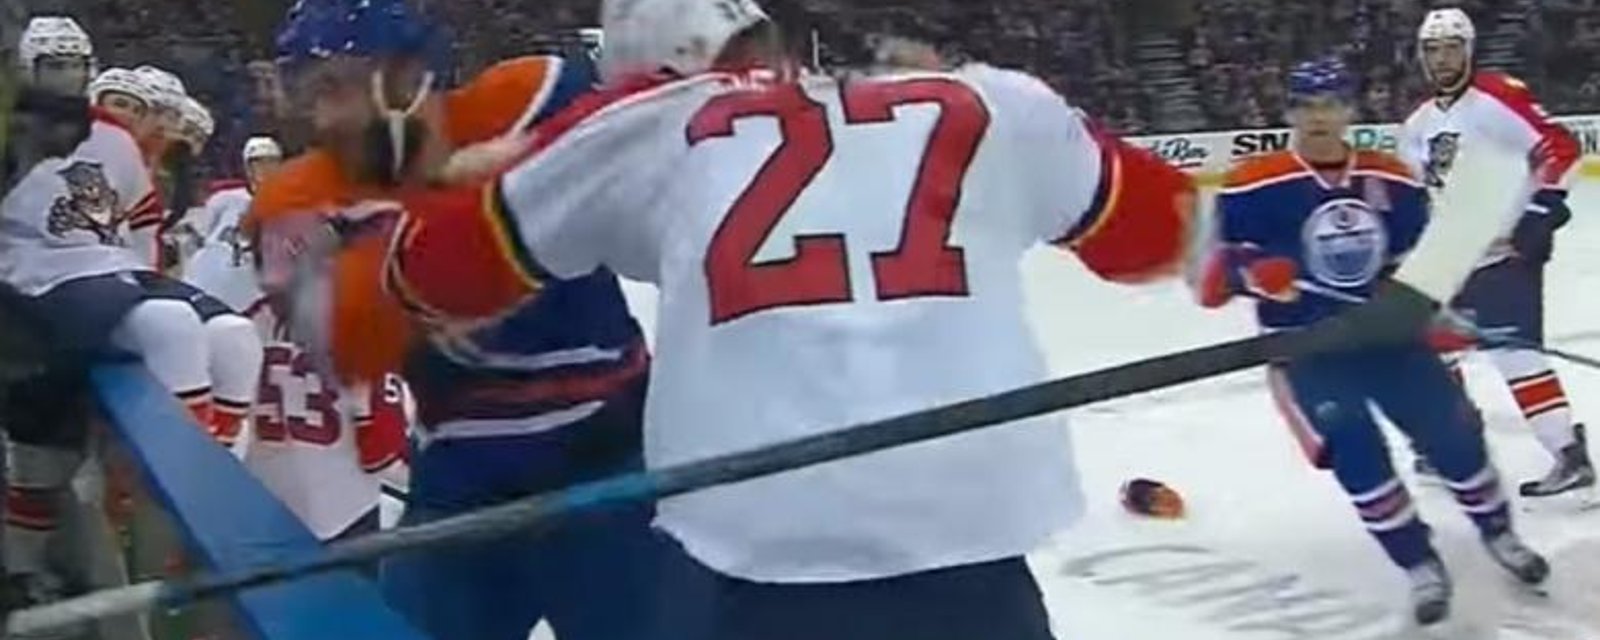 Fight between Bjugstad and Gryba leaves one man a bloody mess.